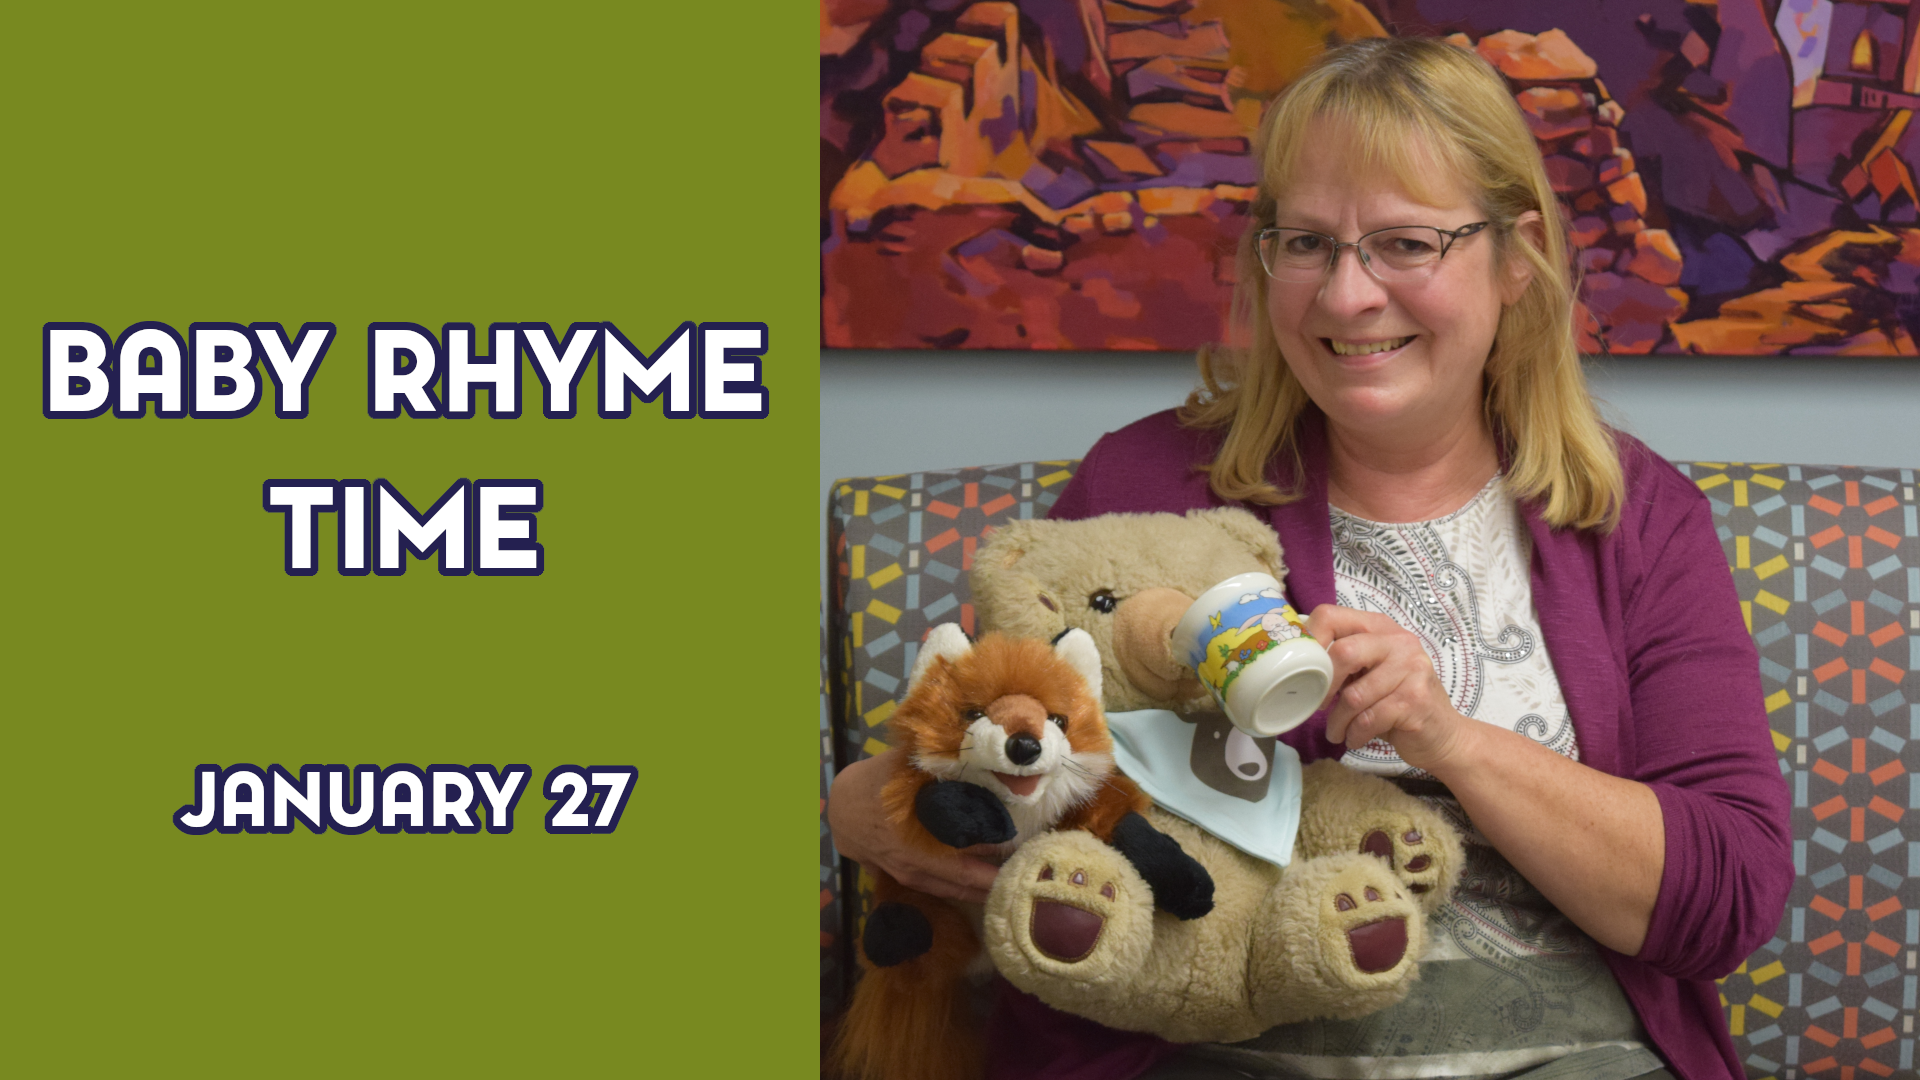 A woman holds two stuffed animals next to the text "Baby Rhyme Time January 27"